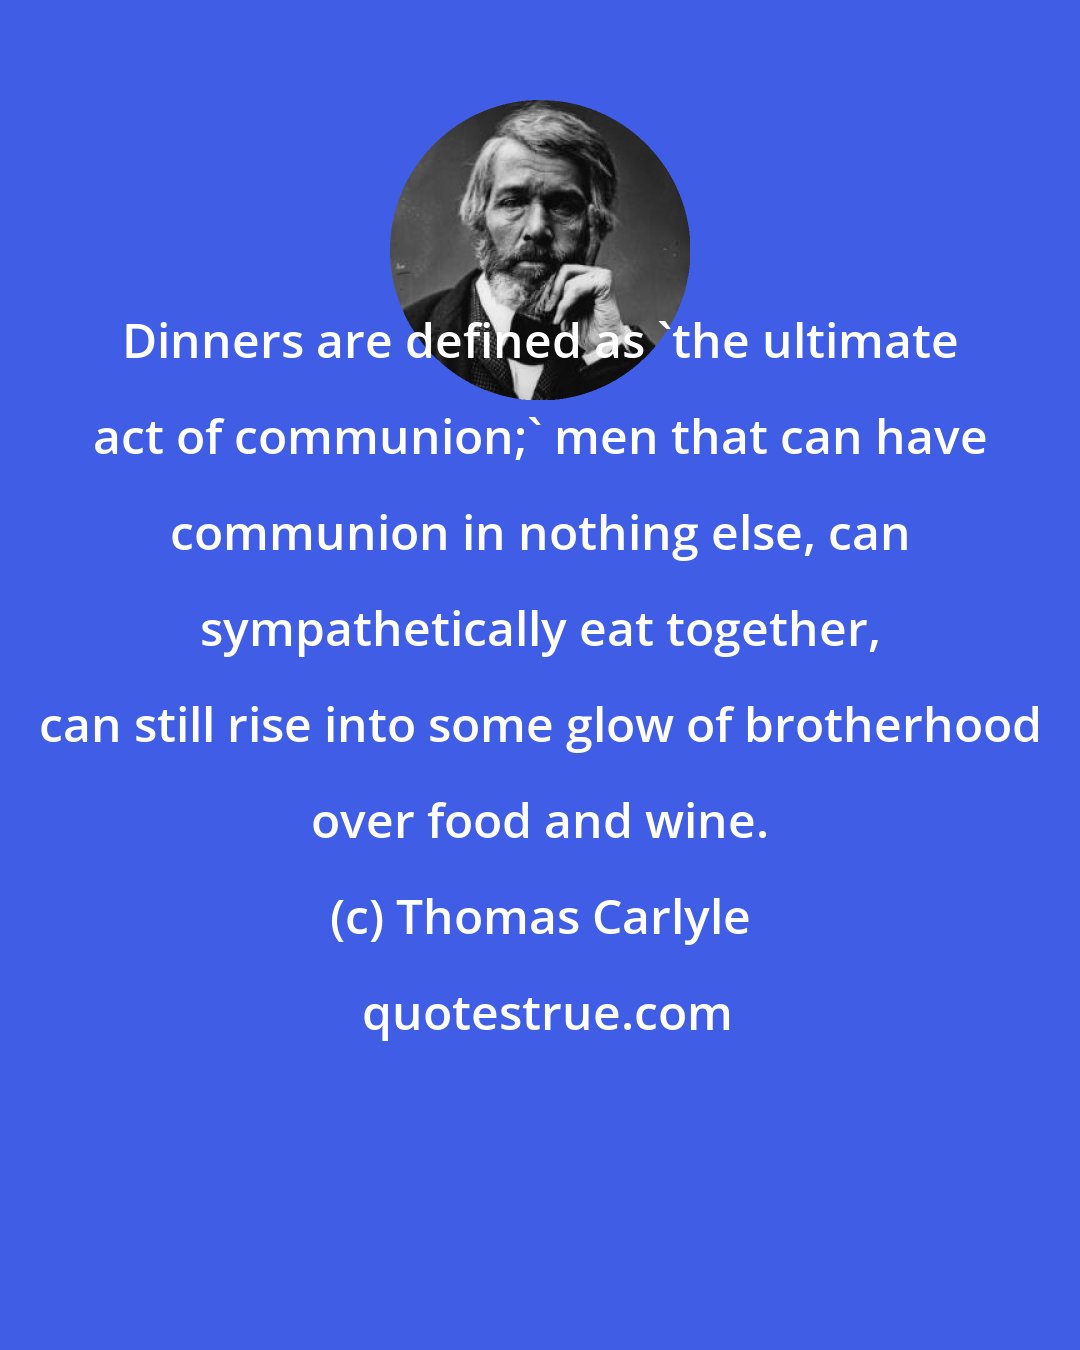 Thomas Carlyle: Dinners are defined as 'the ultimate act of communion;' men that can have communion in nothing else, can sympathetically eat together, can still rise into some glow of brotherhood over food and wine.